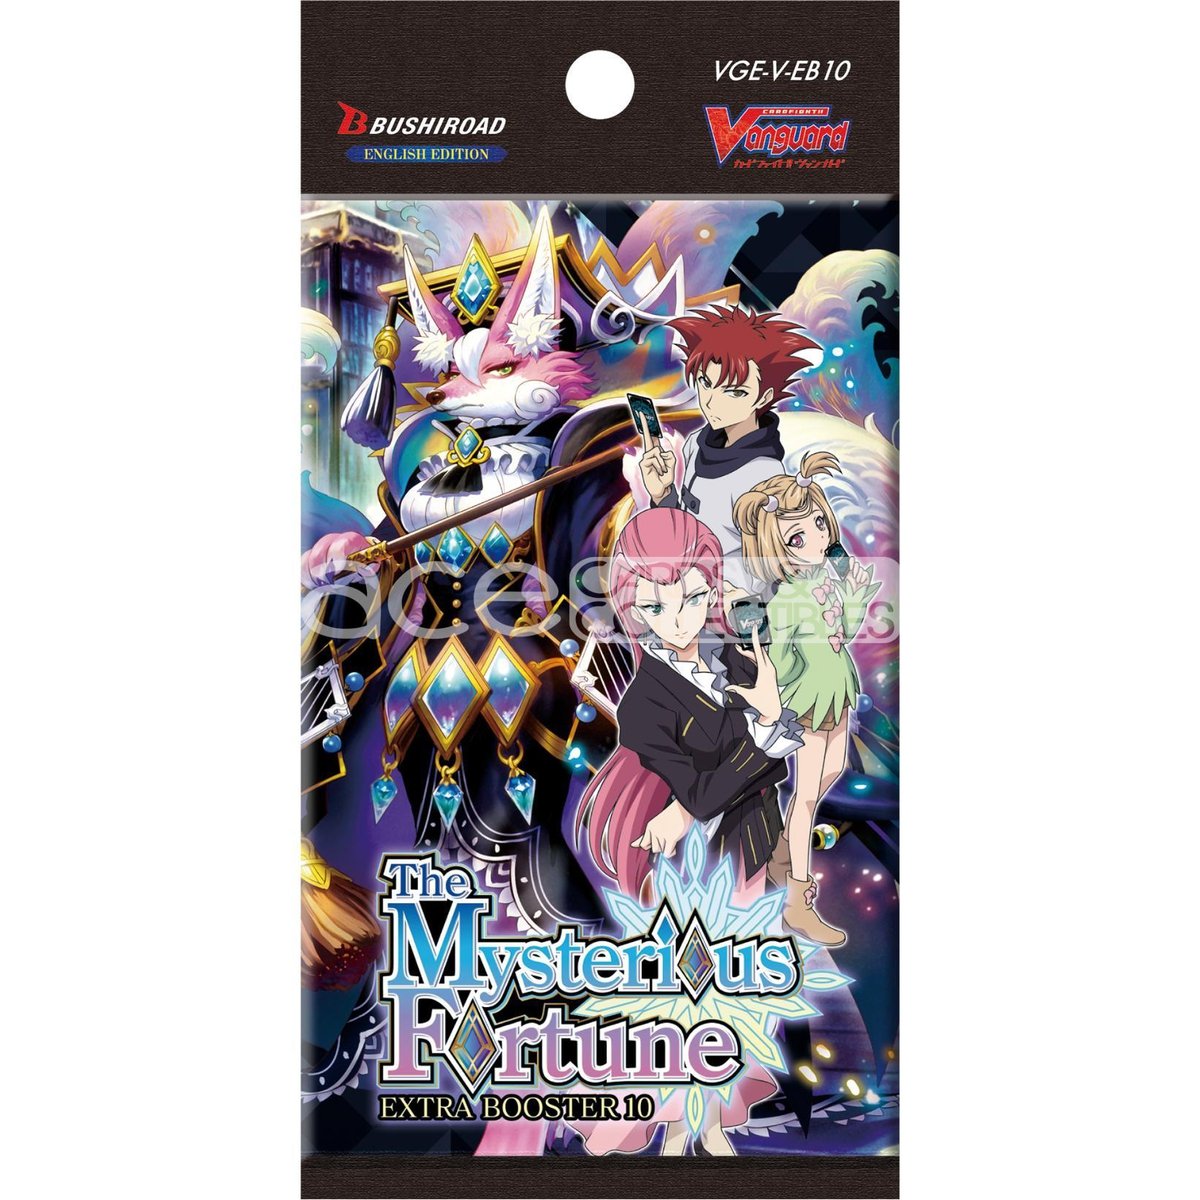 Cardfight Vanguard V The Mysterious Fortune [VGE-V-EB10] (English)-Single Pack (Random)-Bushiroad-Ace Cards &amp; Collectibles